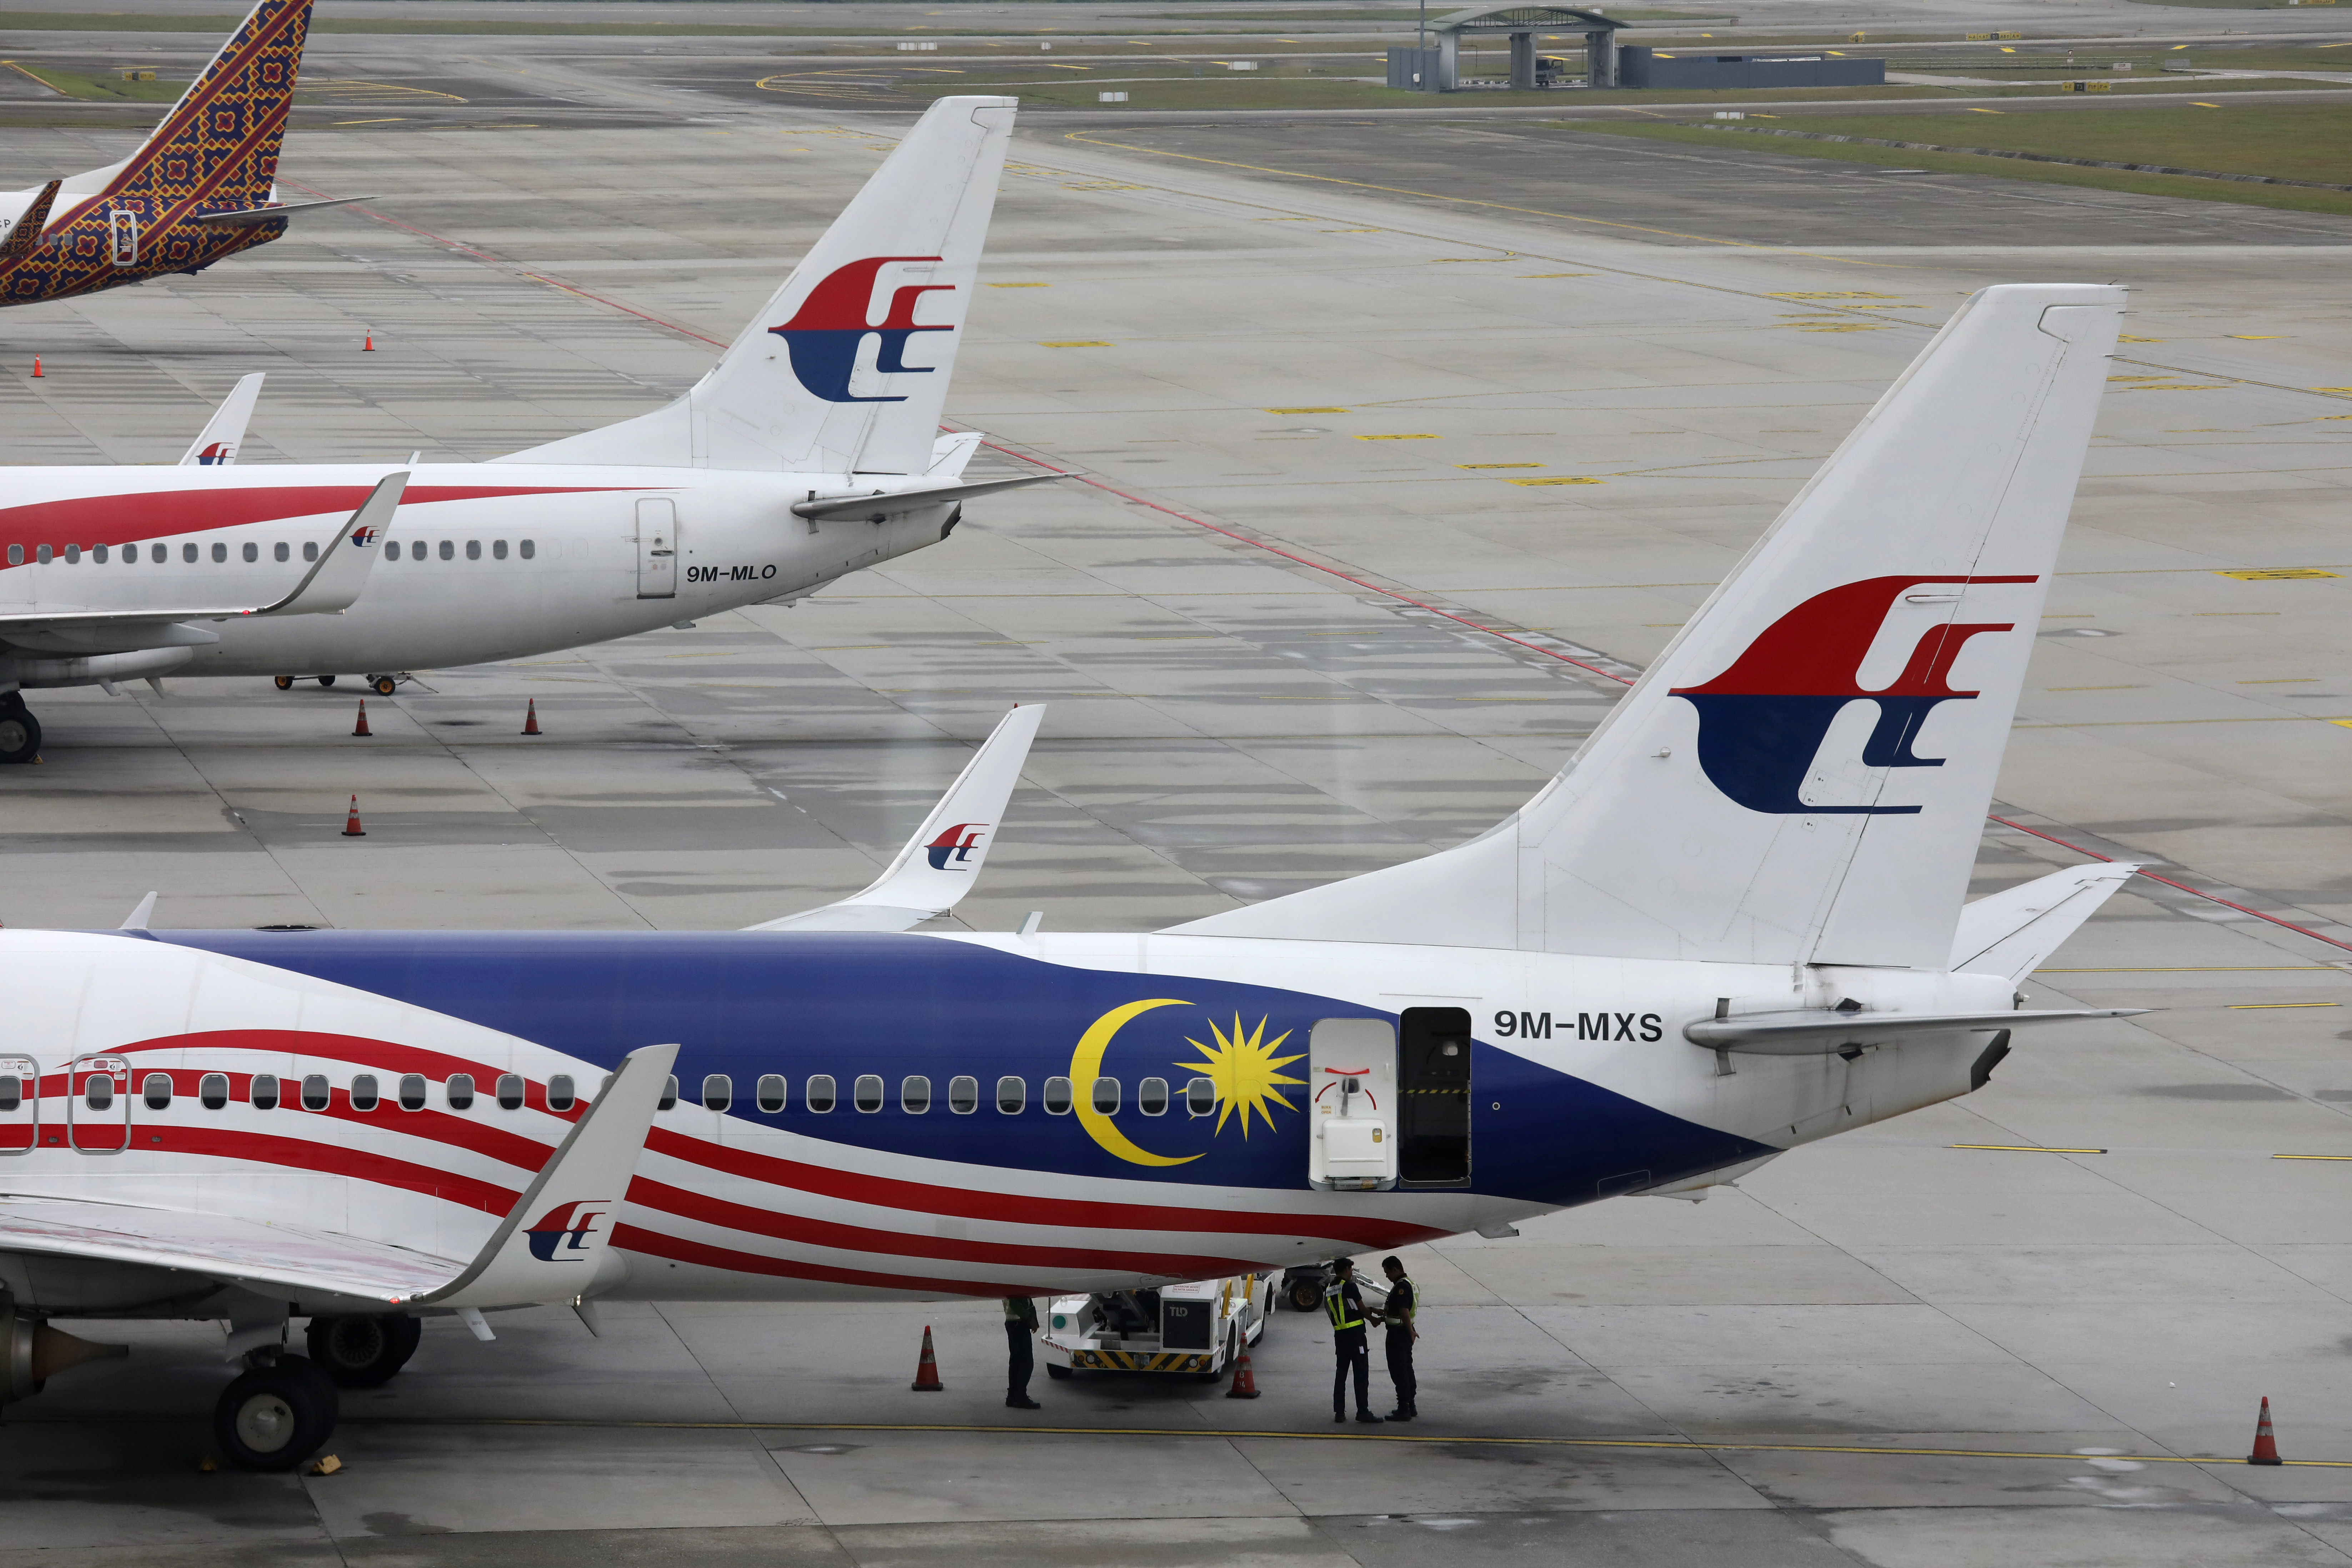 © Reuters. Malaysia Airlines planes are pictured at Kuala Lumpur International Airport in Sepang